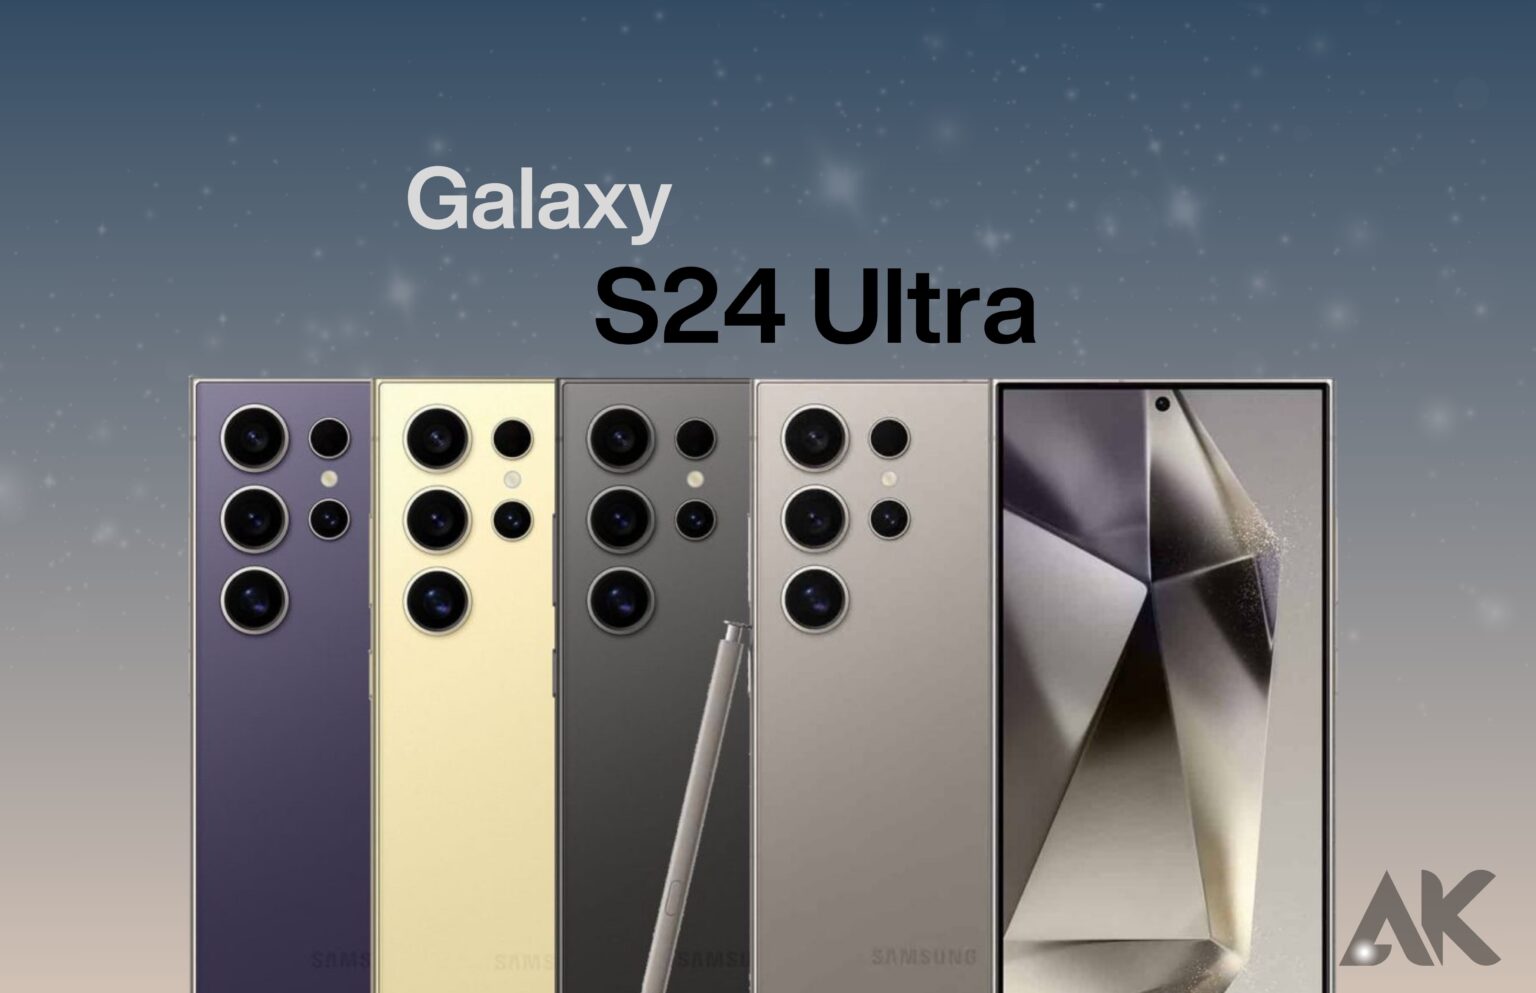 Discover the stunning color options available for the Galaxy S24 Ultra.